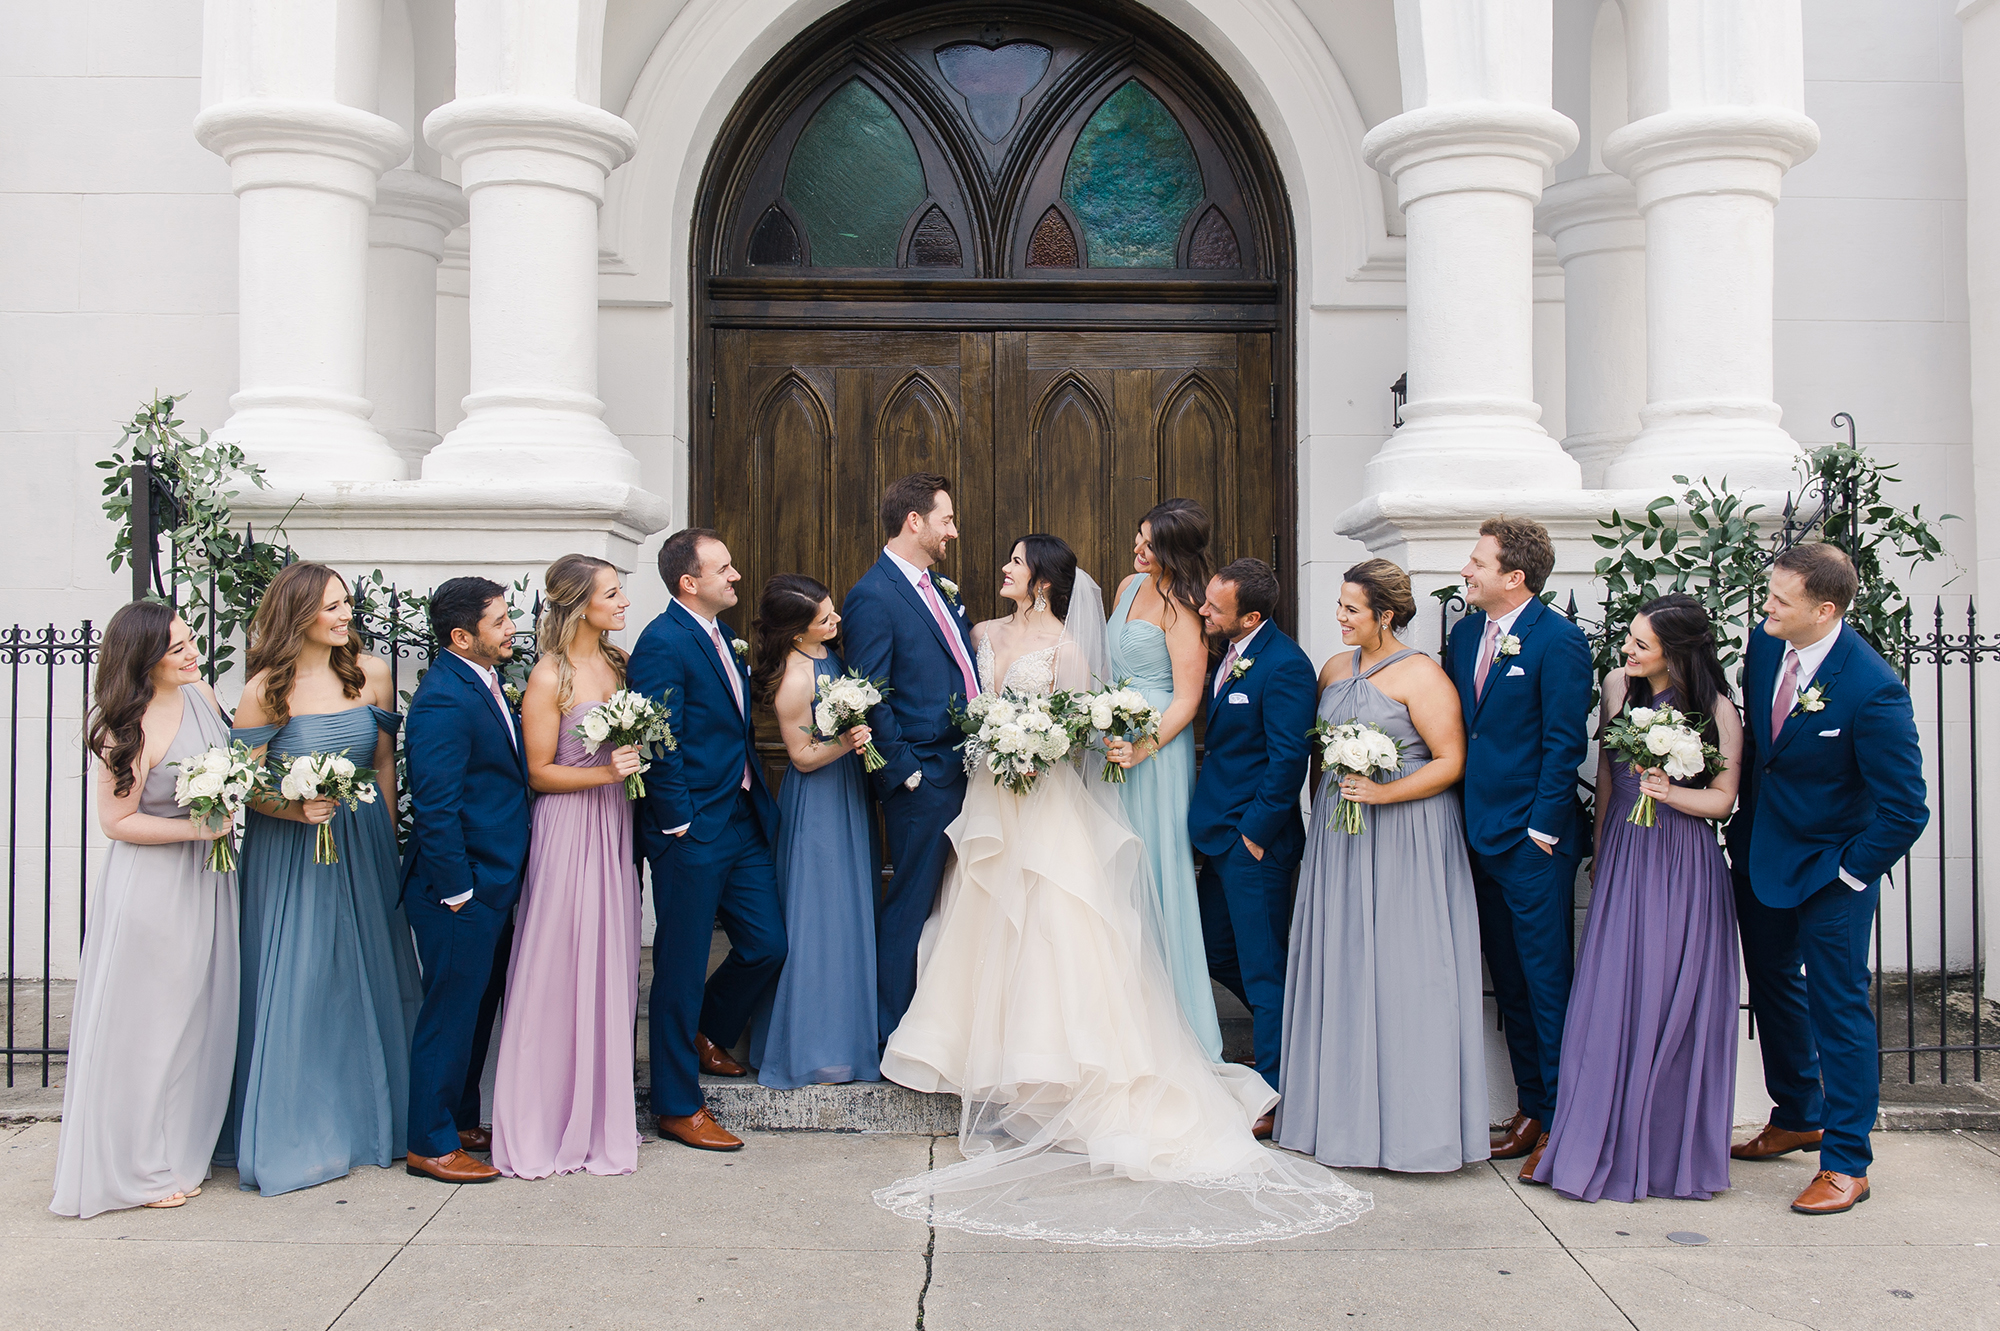 Bride and groom with wedding party outside church